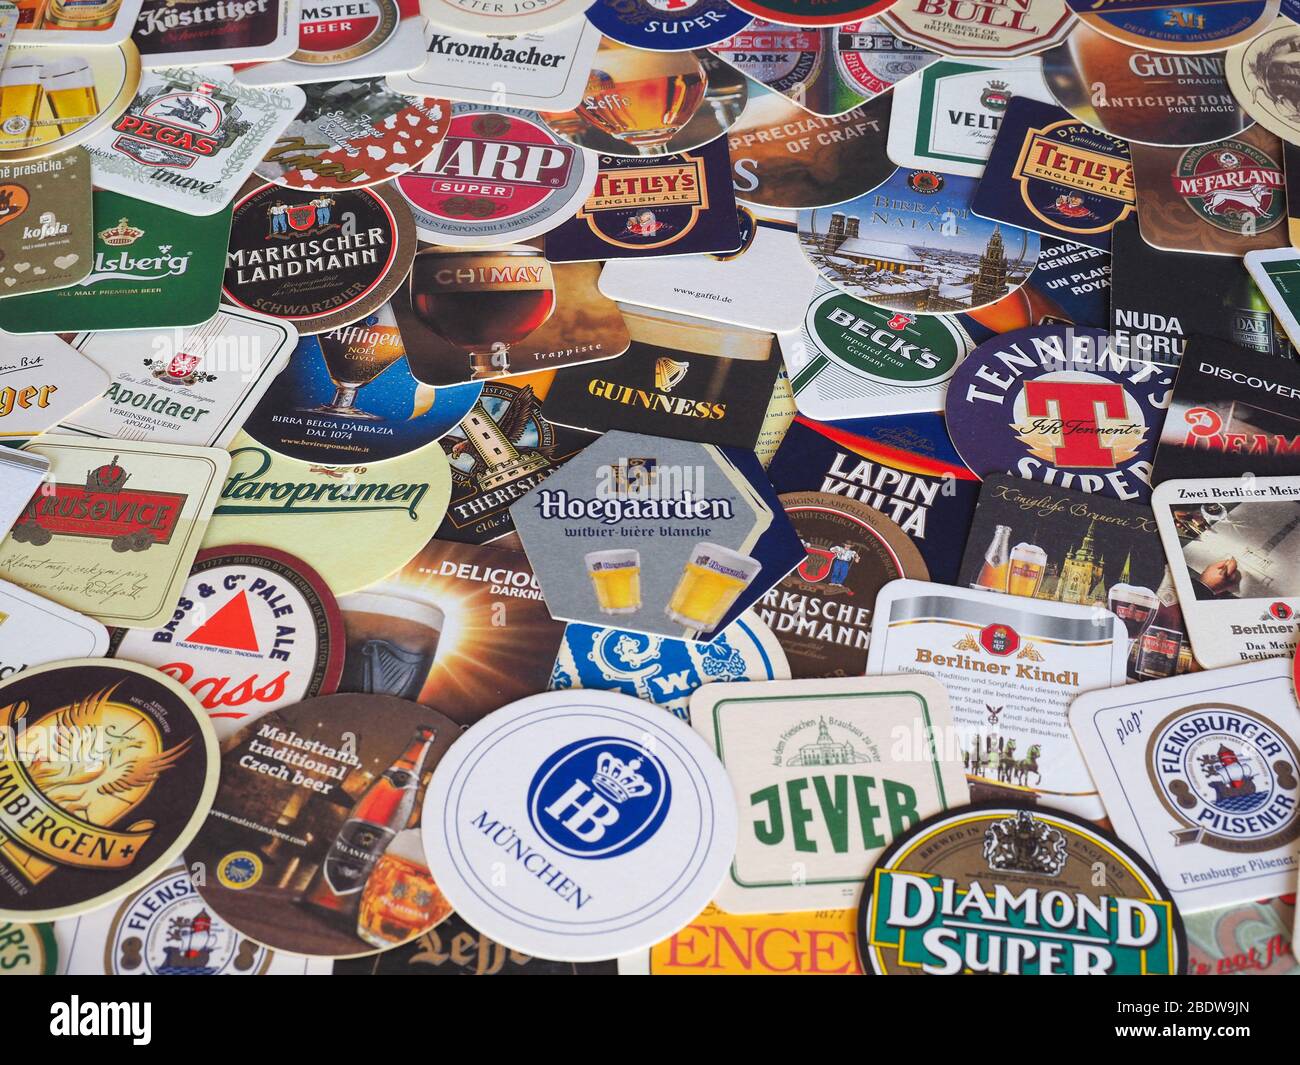 LONDON, UK - MARCH 10, 2020: Beer mats of many different brands Stock Photo  - Alamy